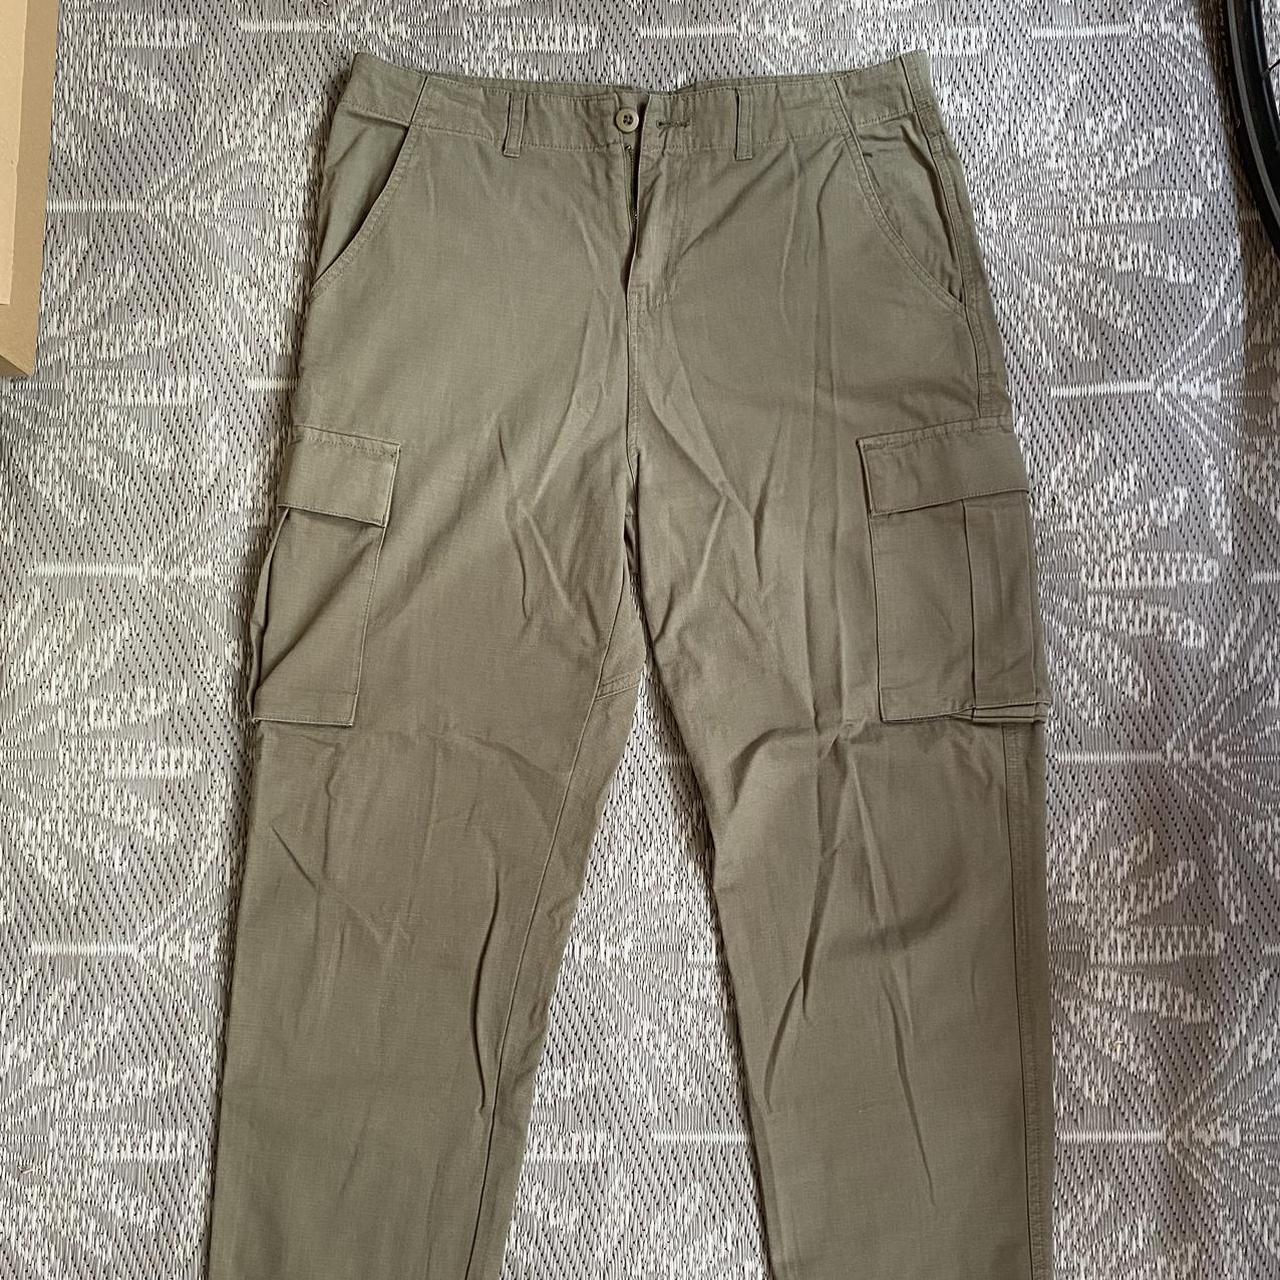 Spencer project rip stop cargo pants - size 32... - Depop